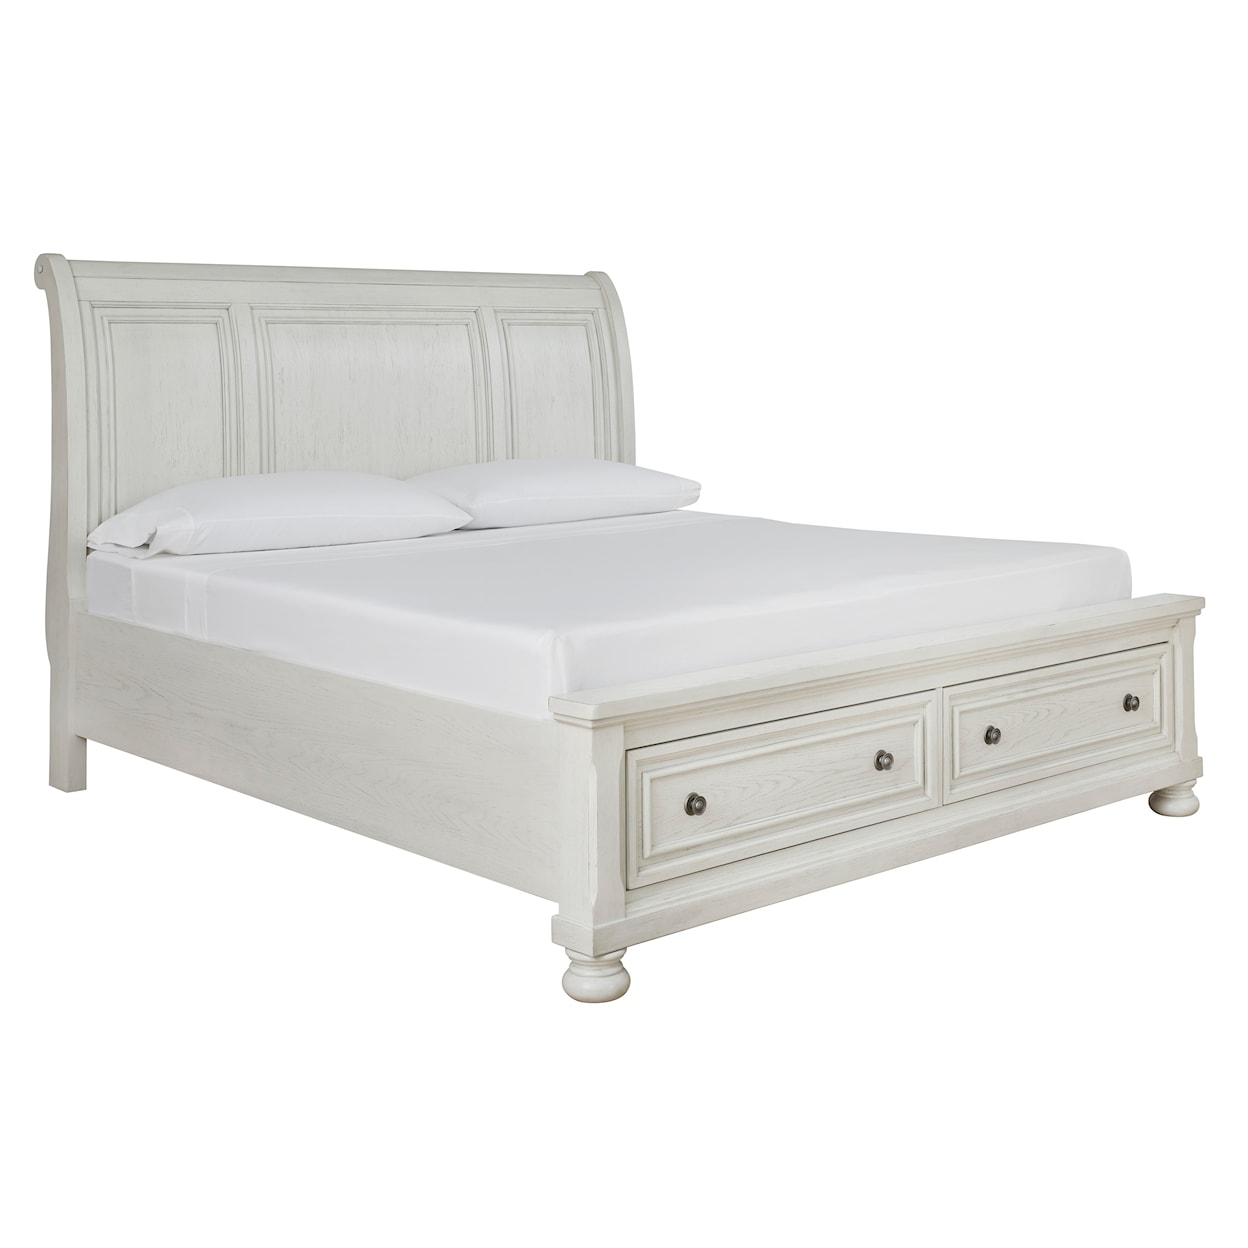 Signature Design Robbinsdale King Sleigh Bed with Storage